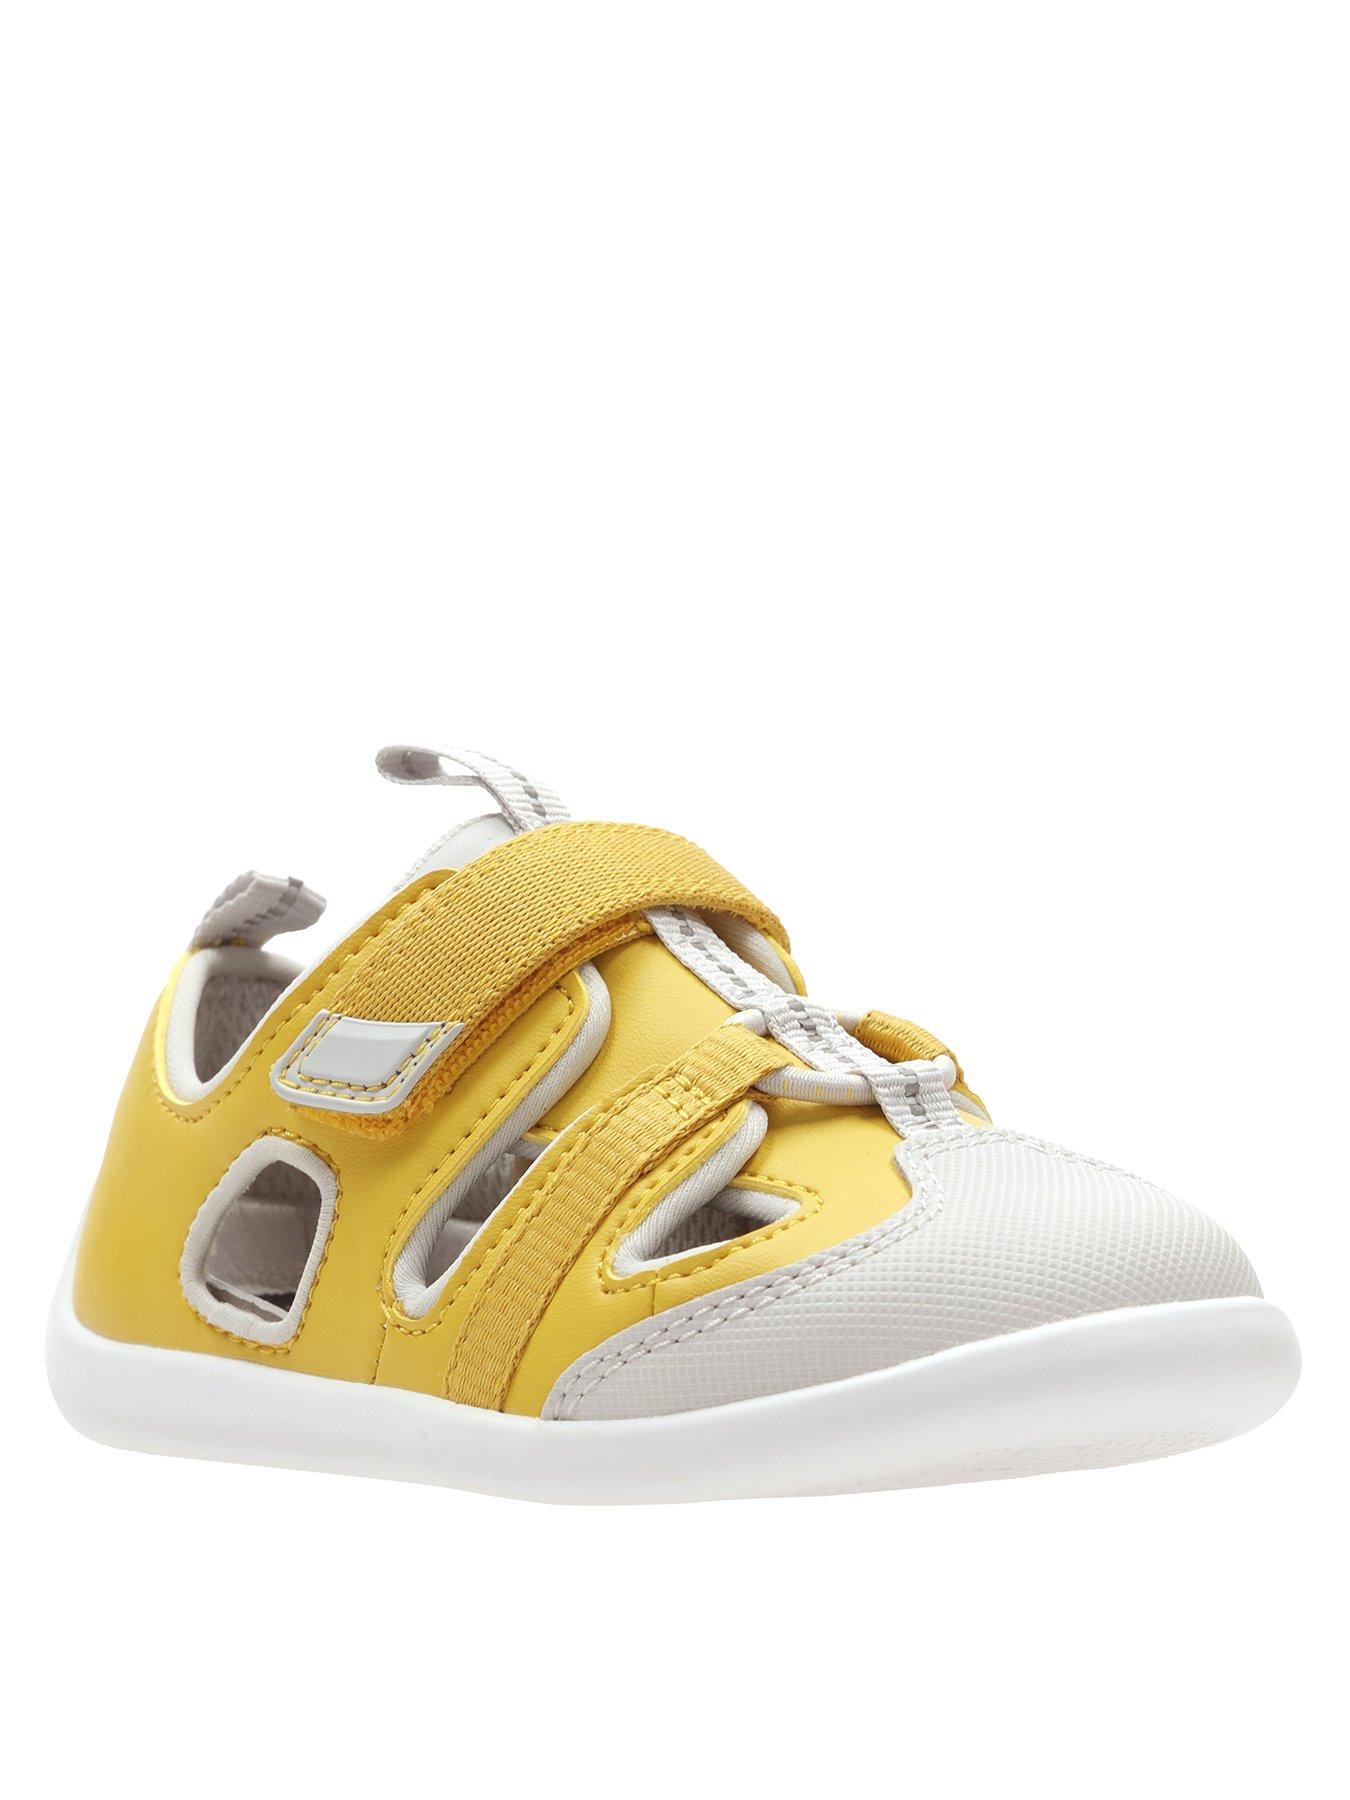 clarks play bright toddler